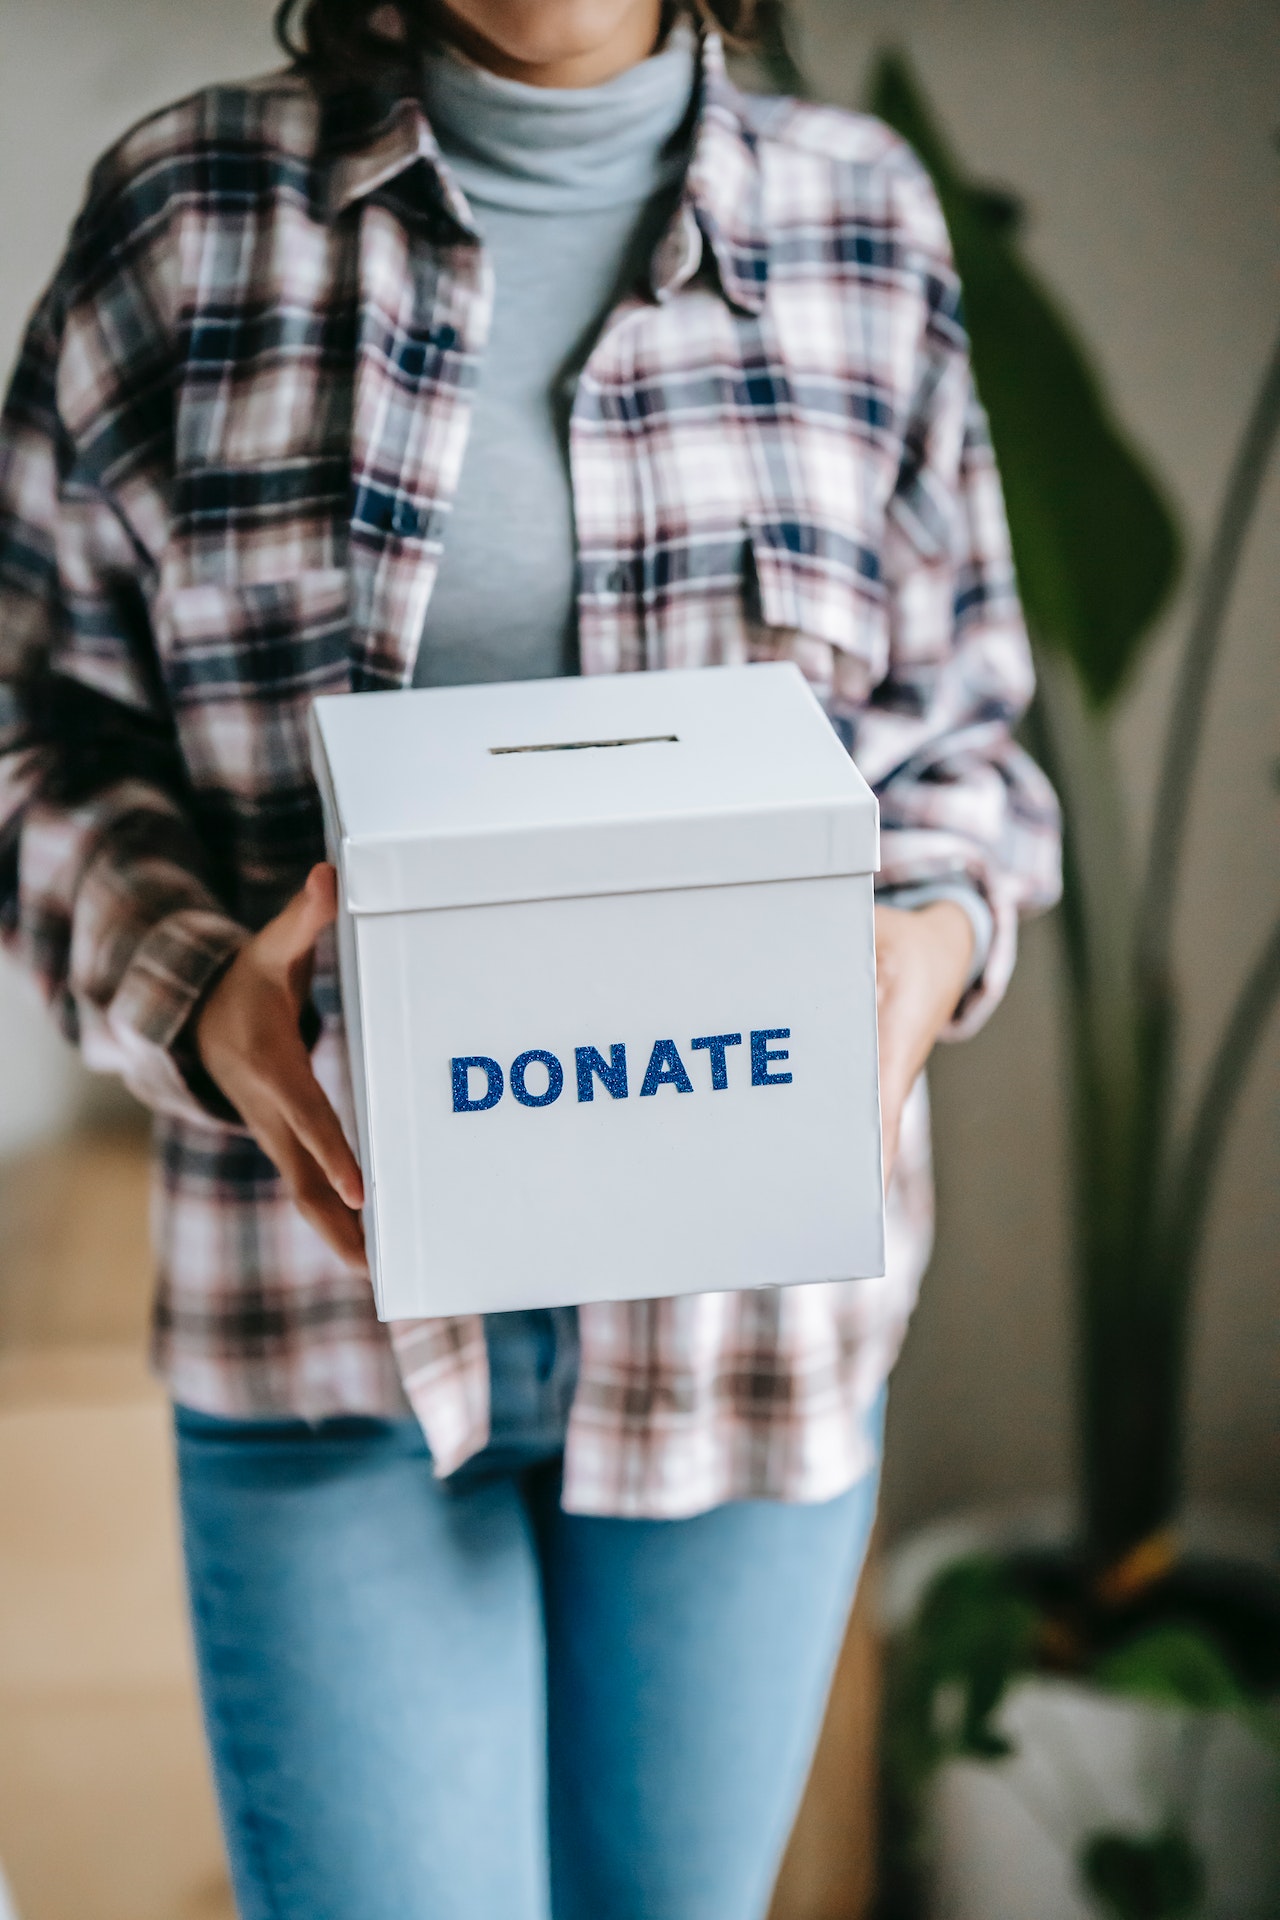 https://www.pexels.com/photo/woman-holding-box-with-inscription-donate-in-light-room-6347730/